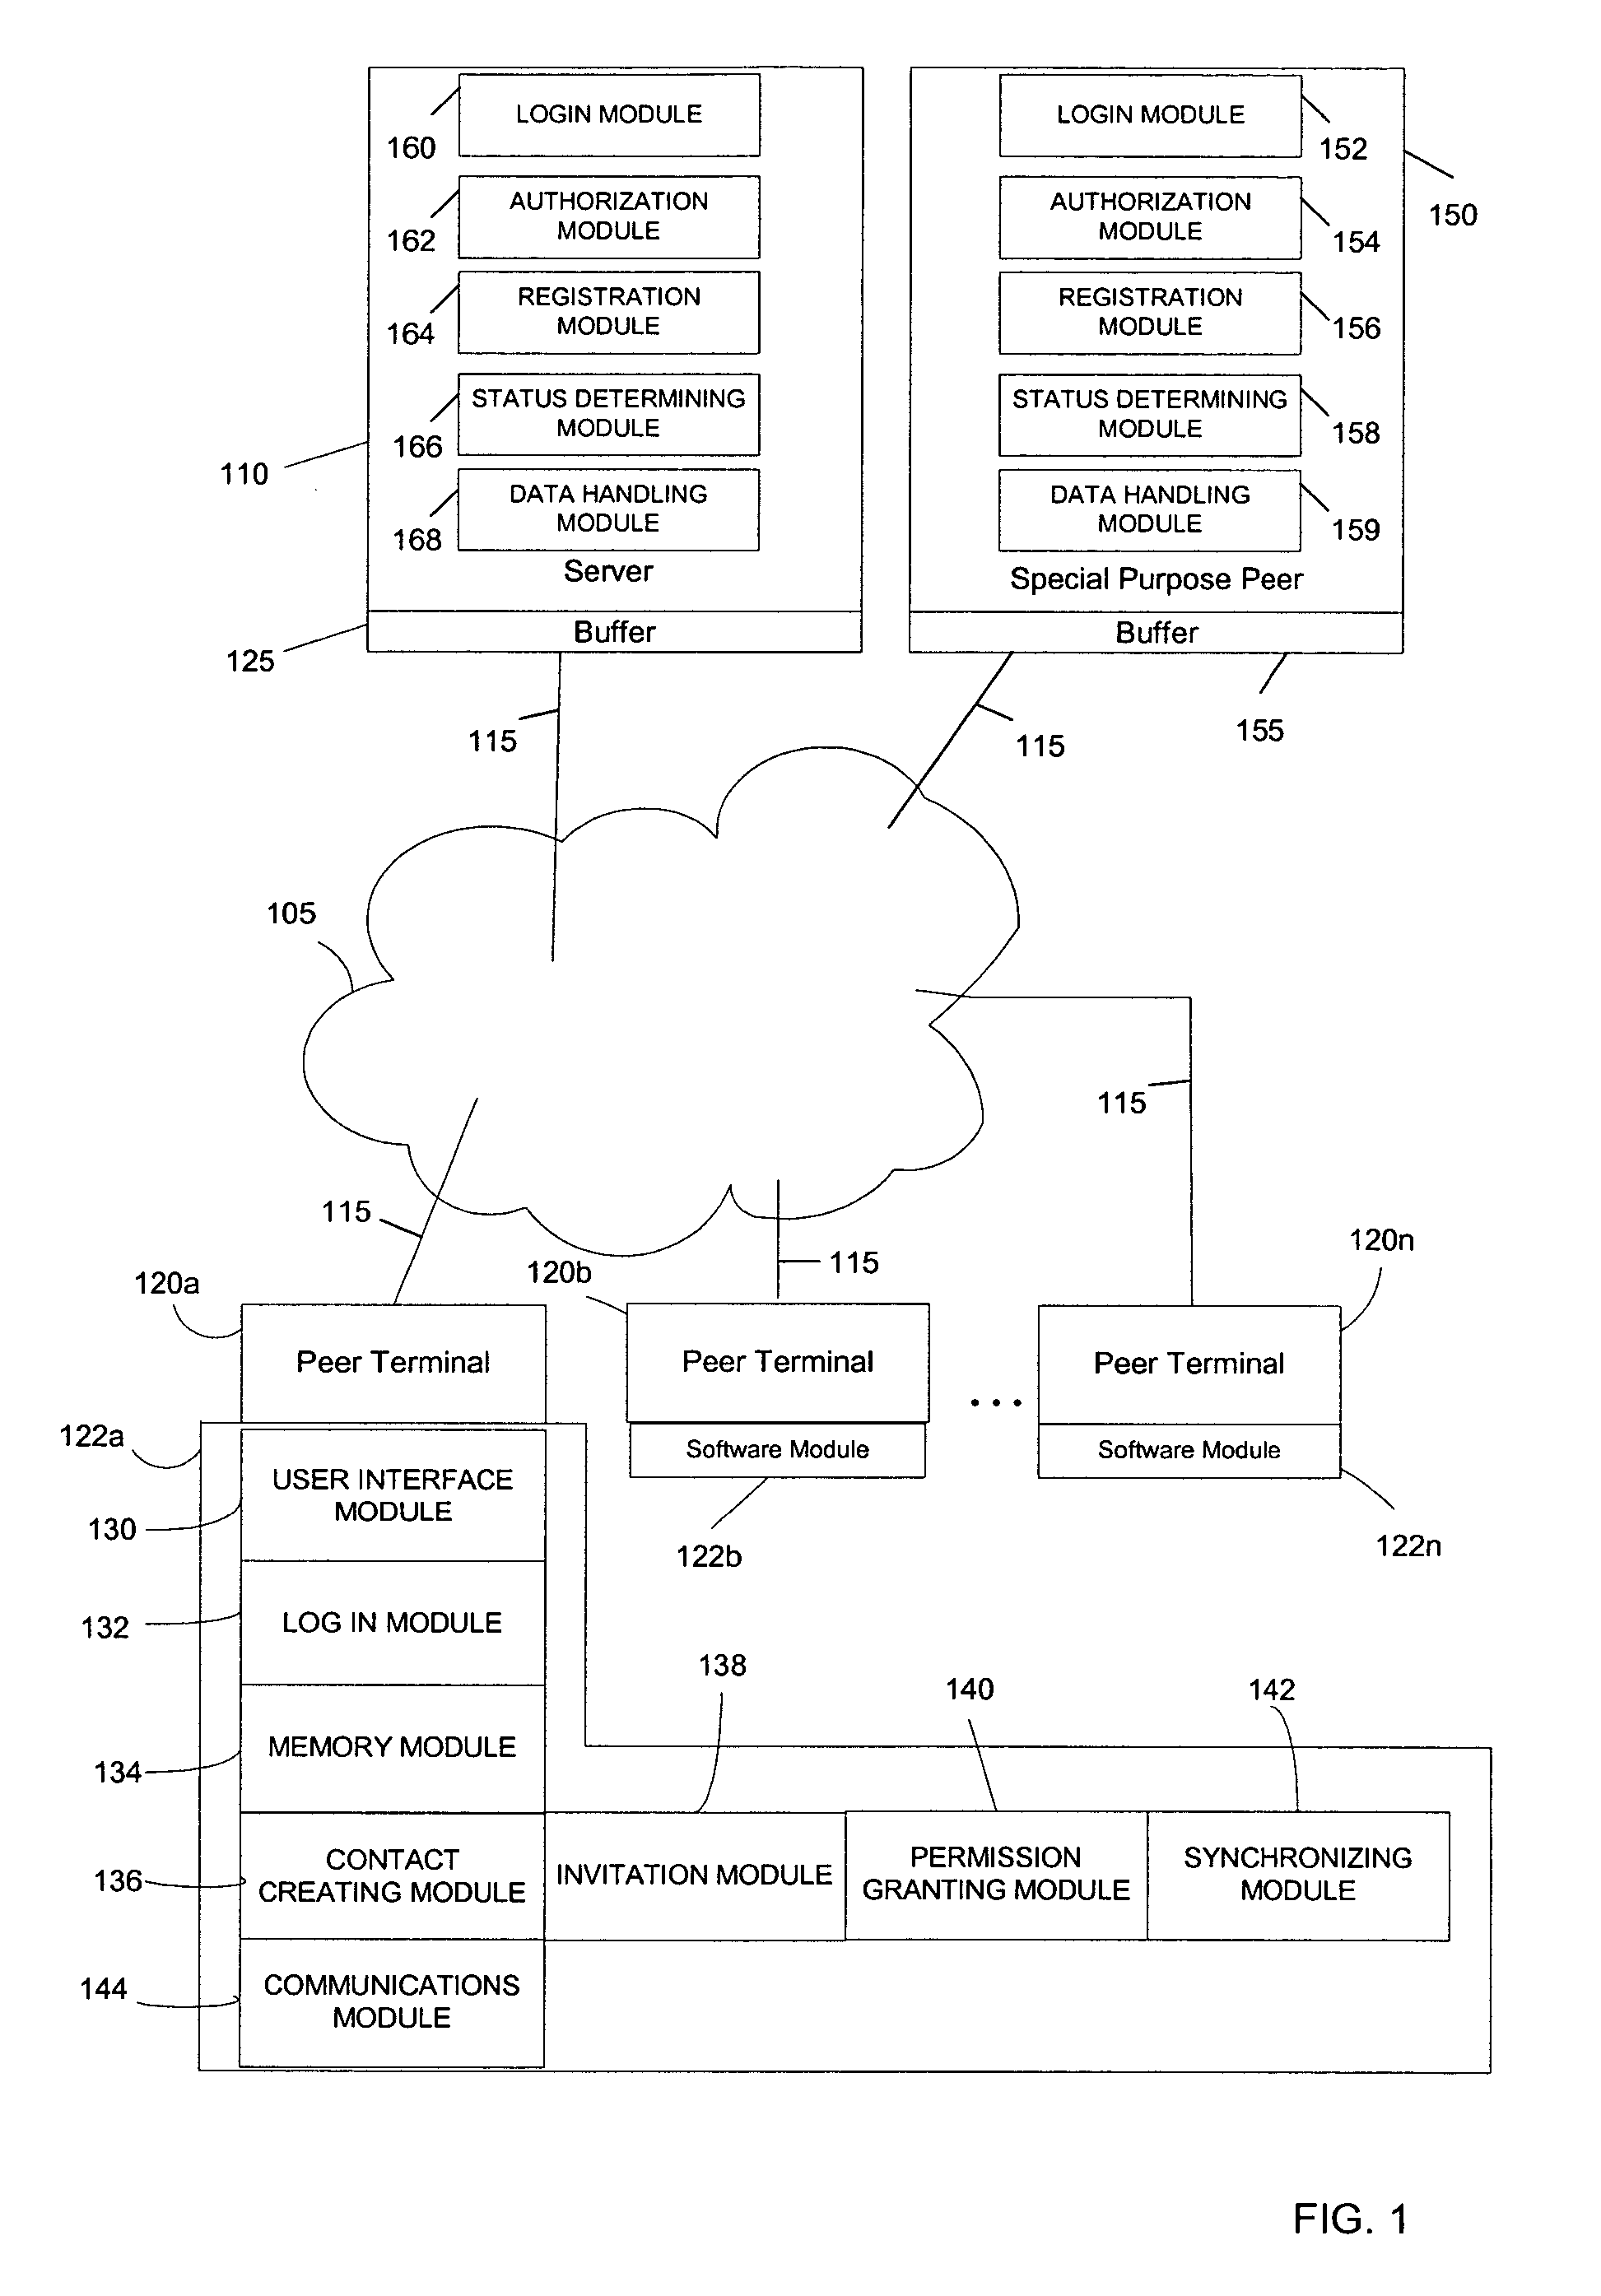 System and method for creating and selectively sharing data elements in a peer-to-peer network